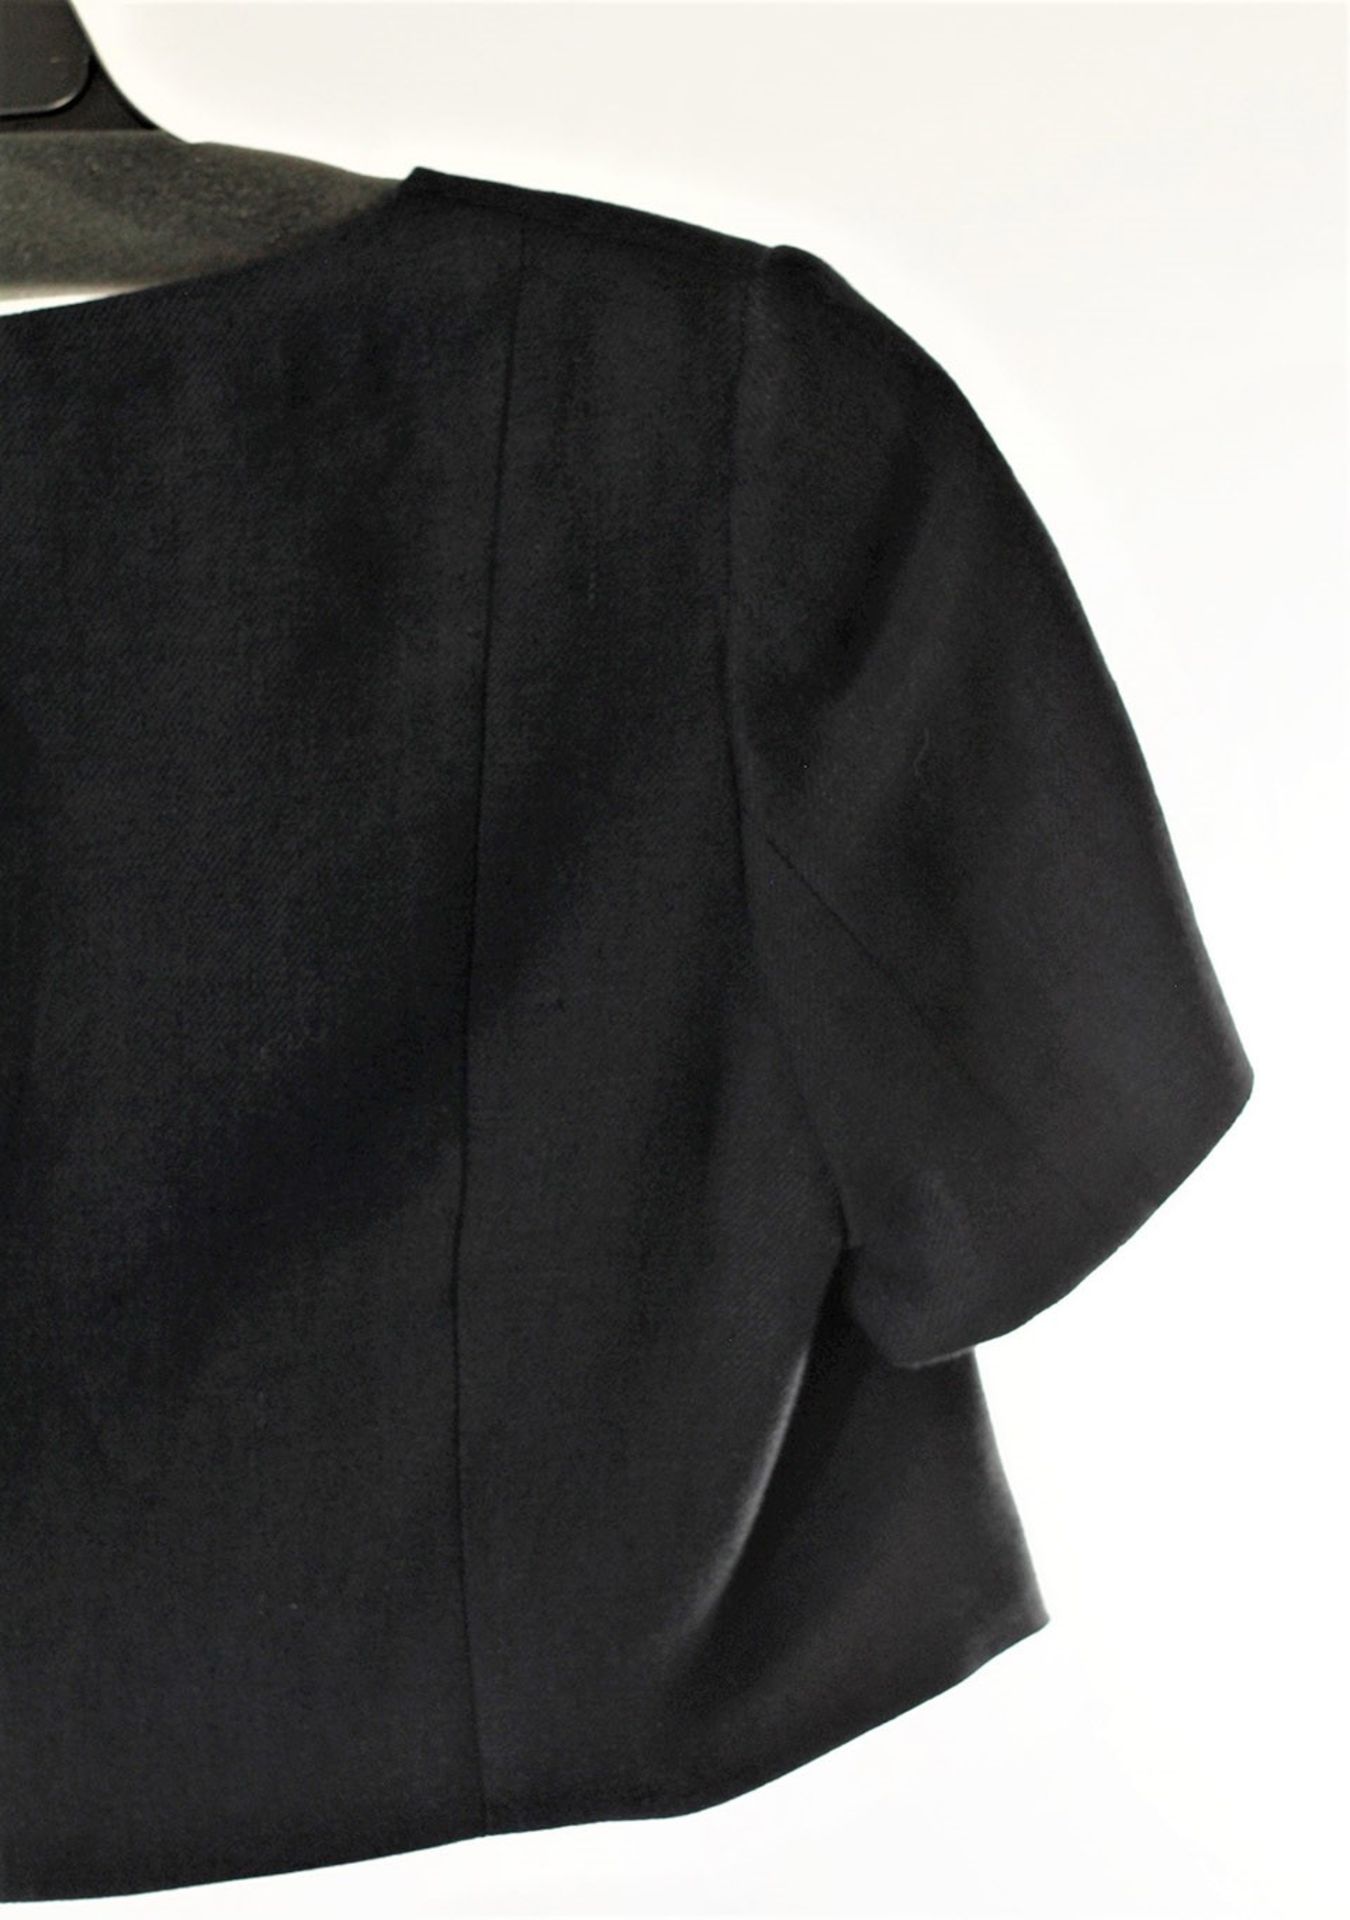 1 x Natan Black Bolero - Size: 10 - Material: 100% Linen - From a High End Clothing Boutique In - Image 6 of 10